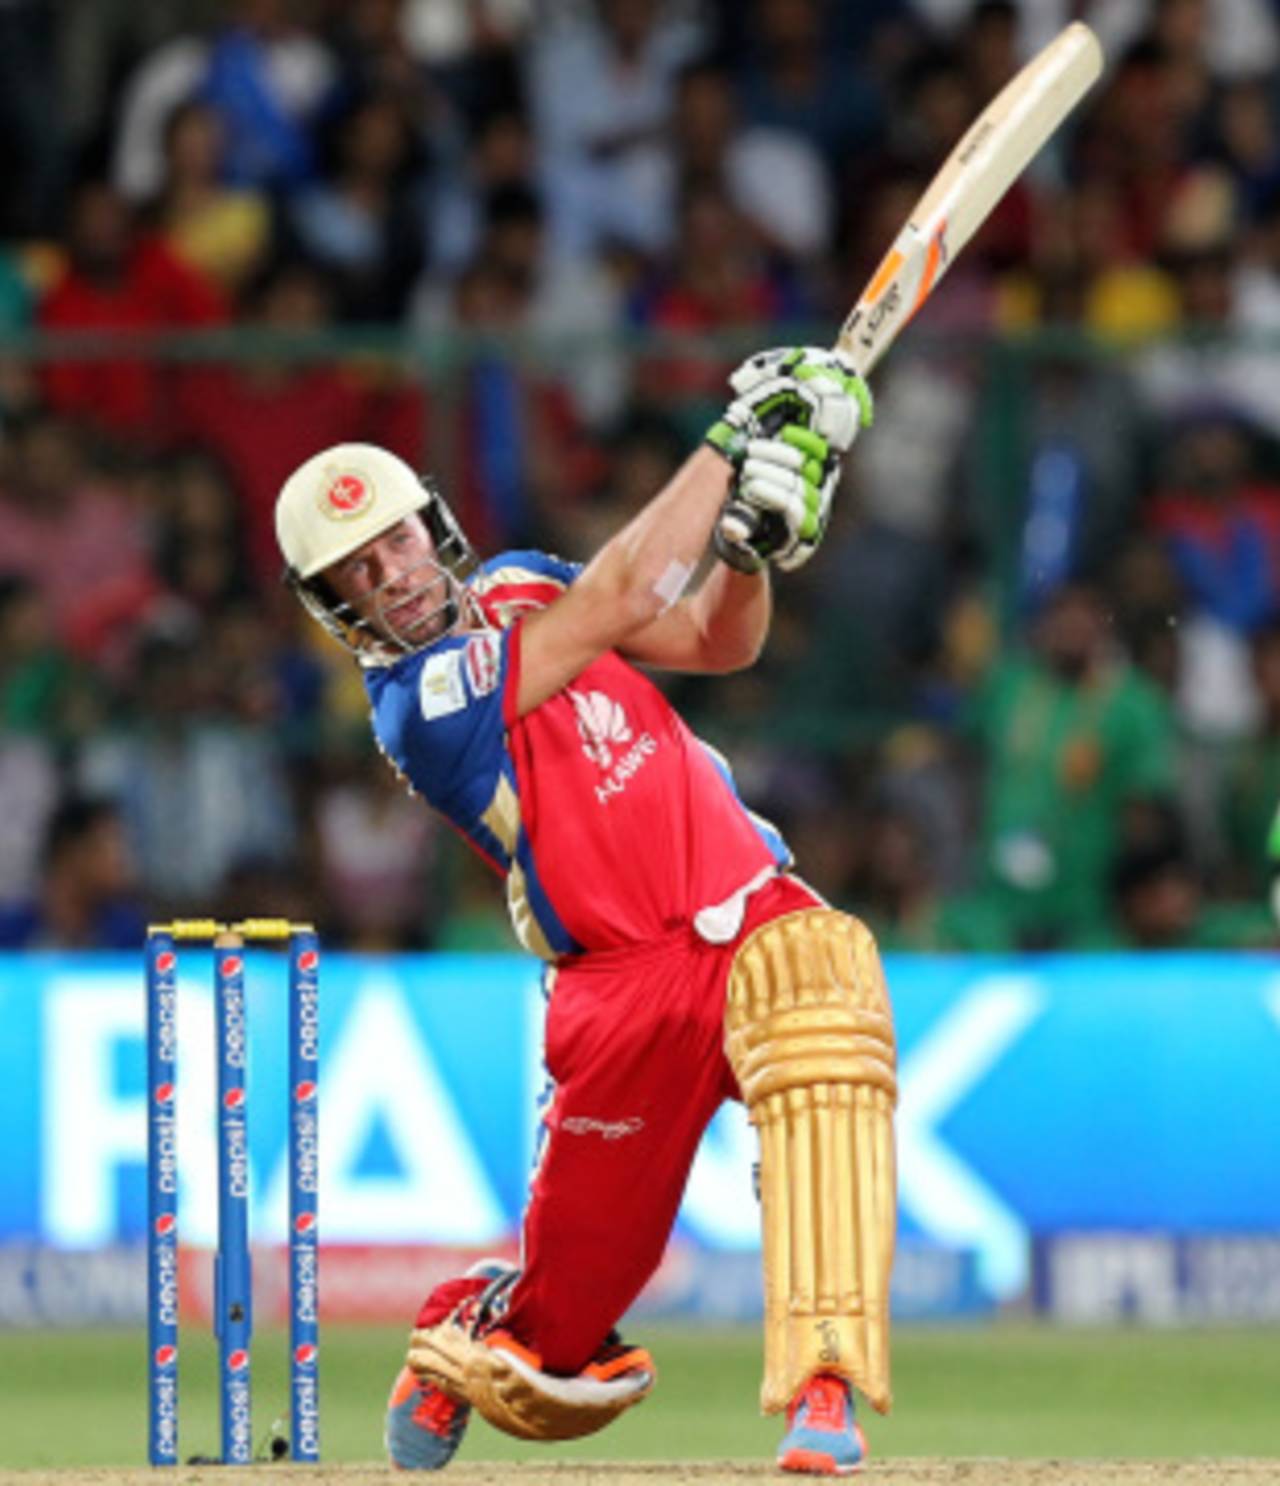 AB de Villiers peppered the straight boundary a few times, Royal Challengers Bangalore v Sunrisers Hyderabad, IPL, Bangalore, May 4, 2014